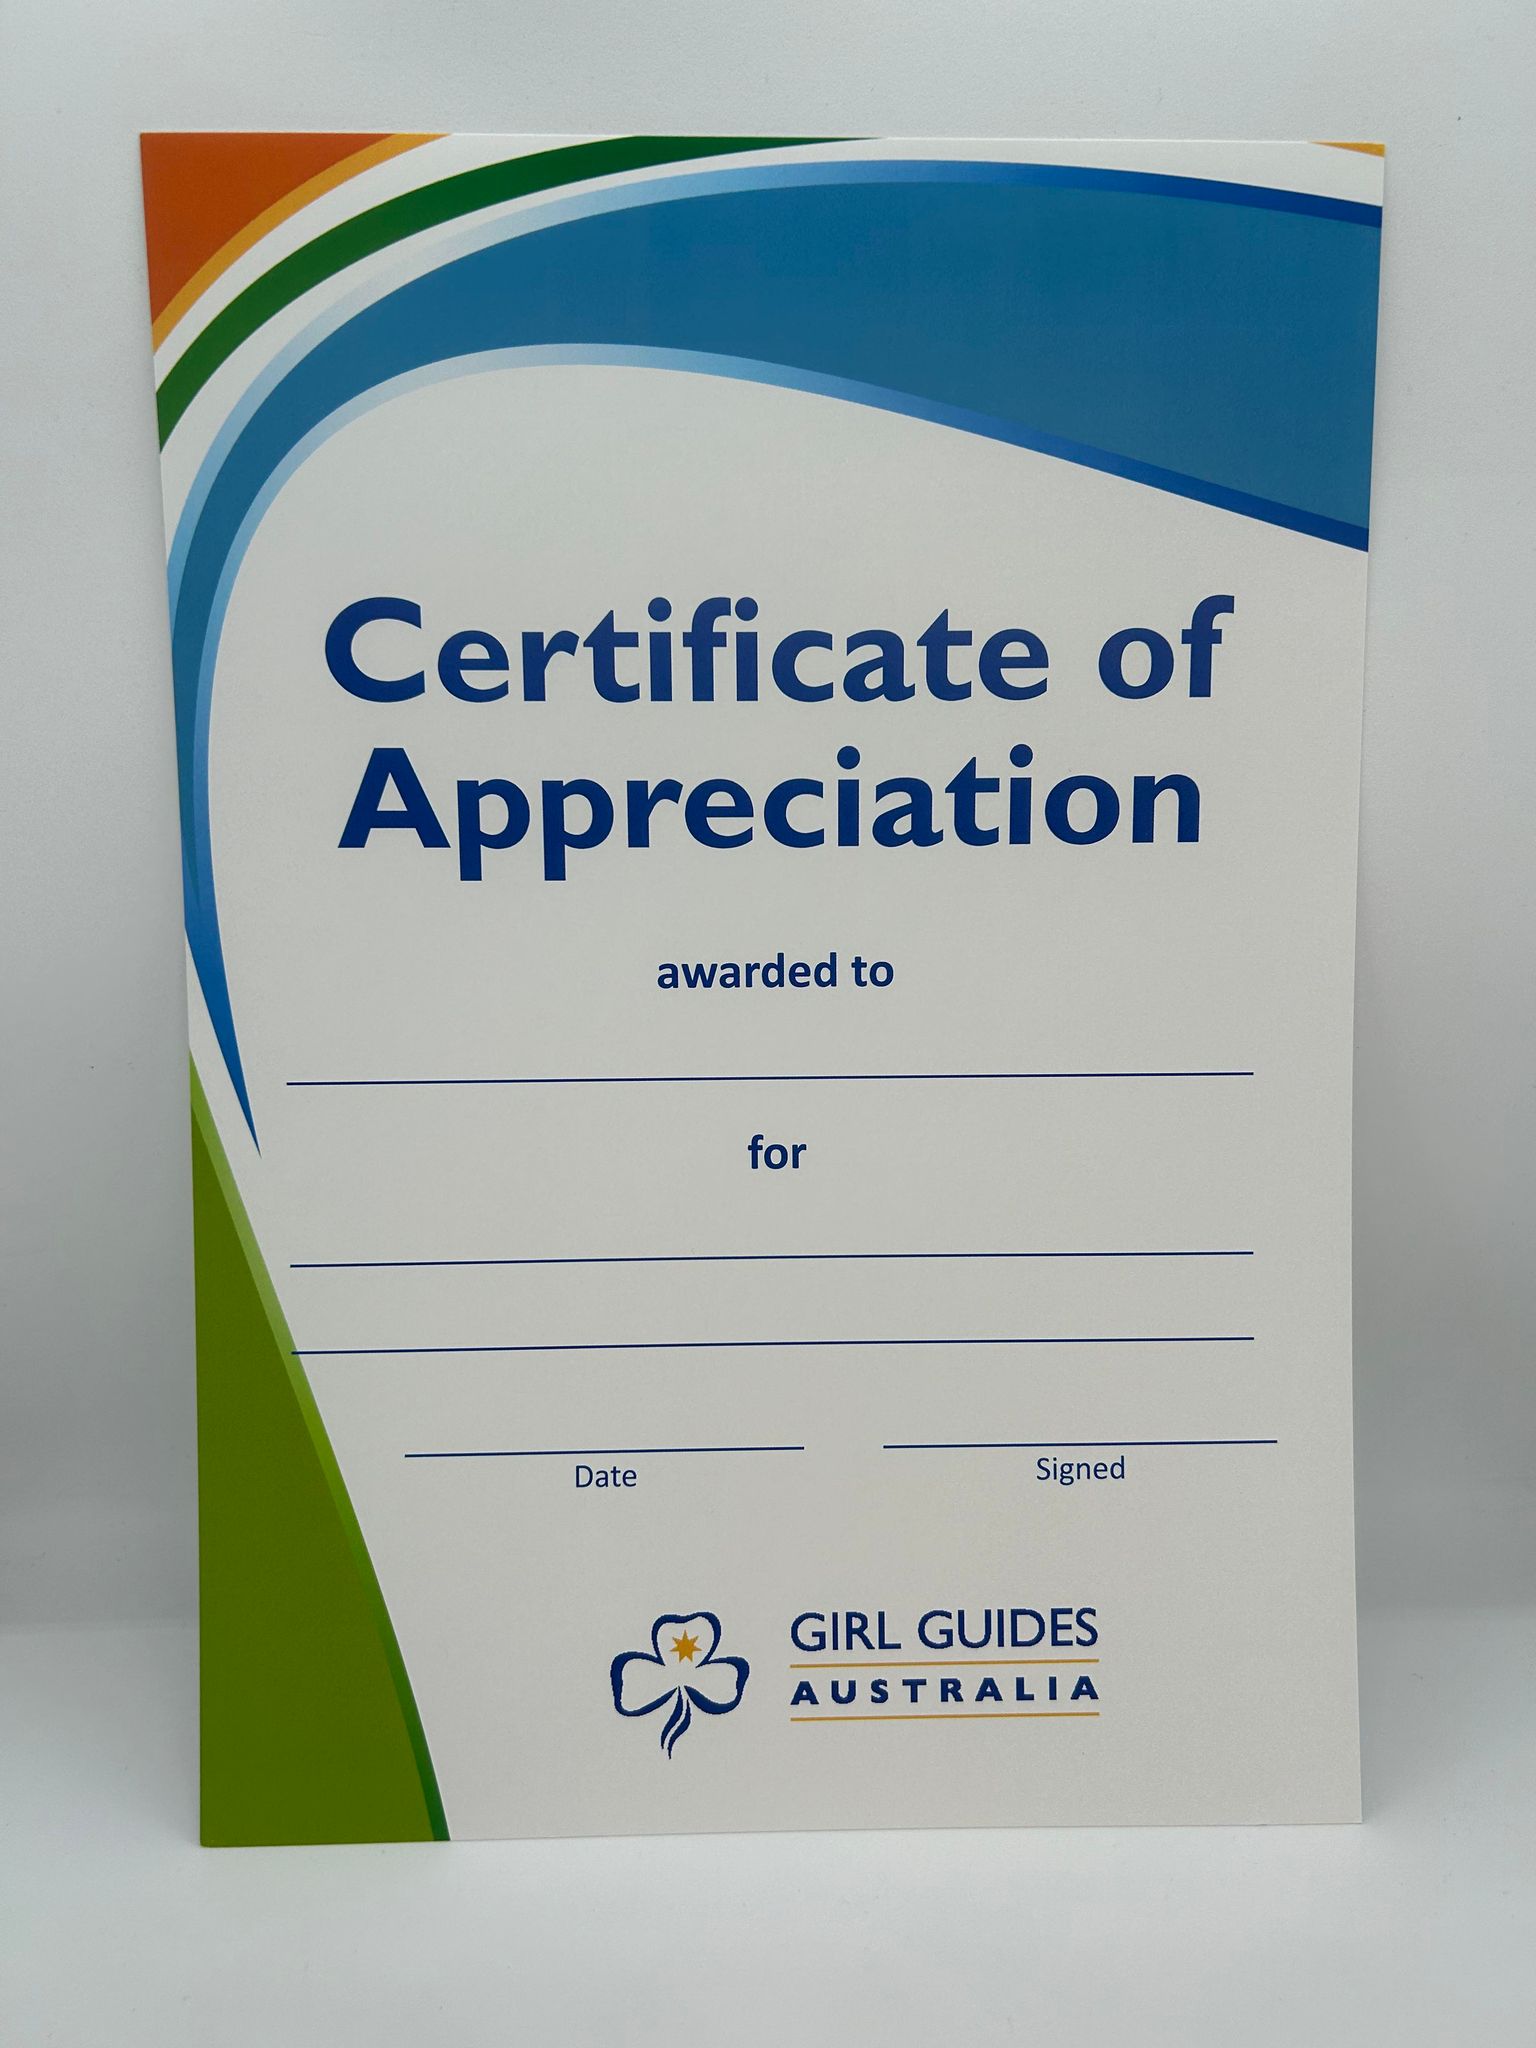 an A4 certificate of appreciation with green, blue and orange swirls